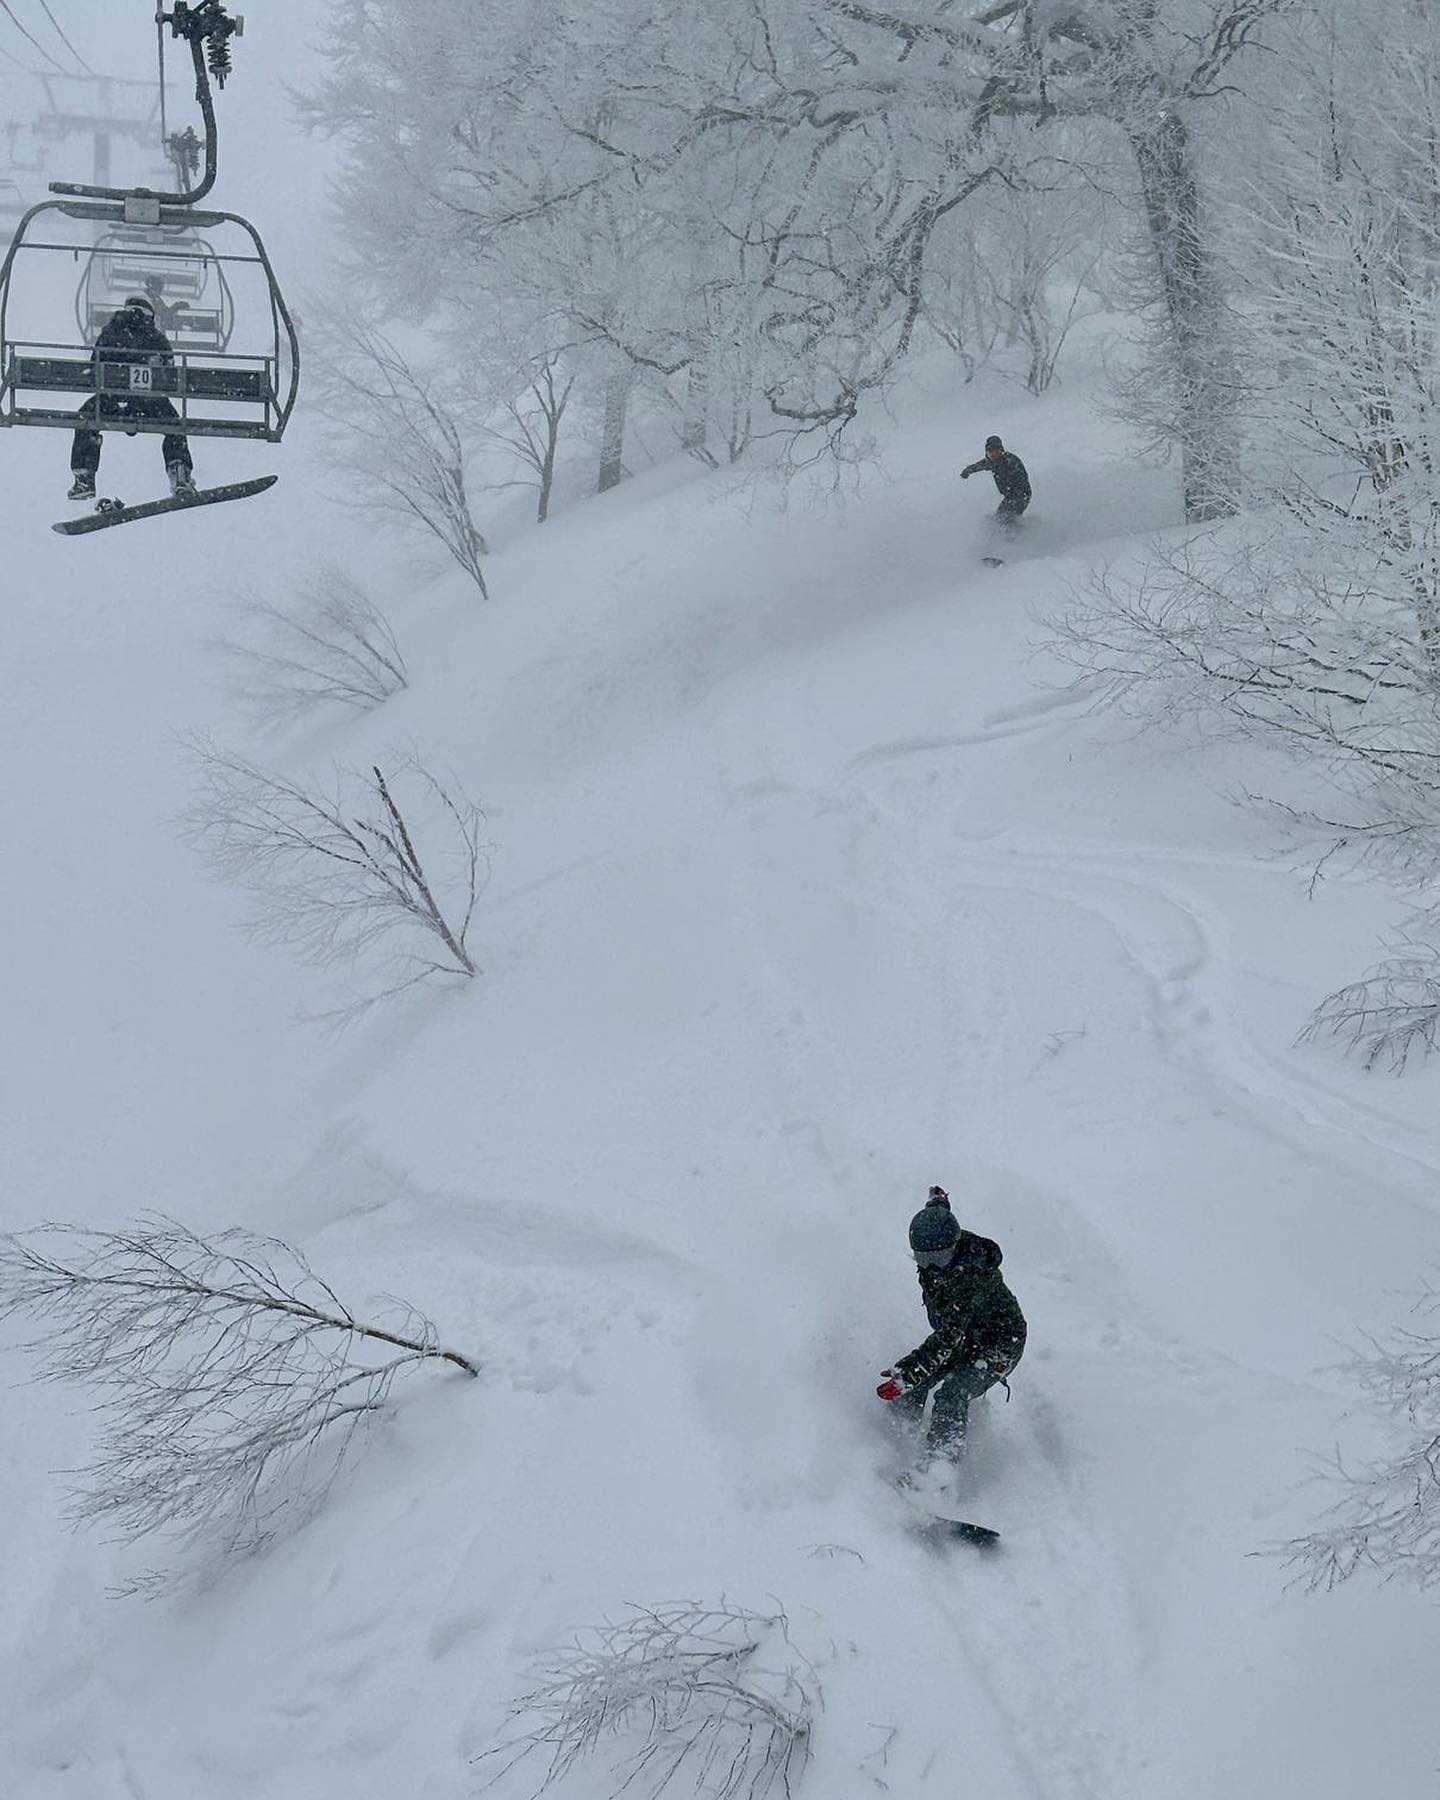 Powder days in late March 